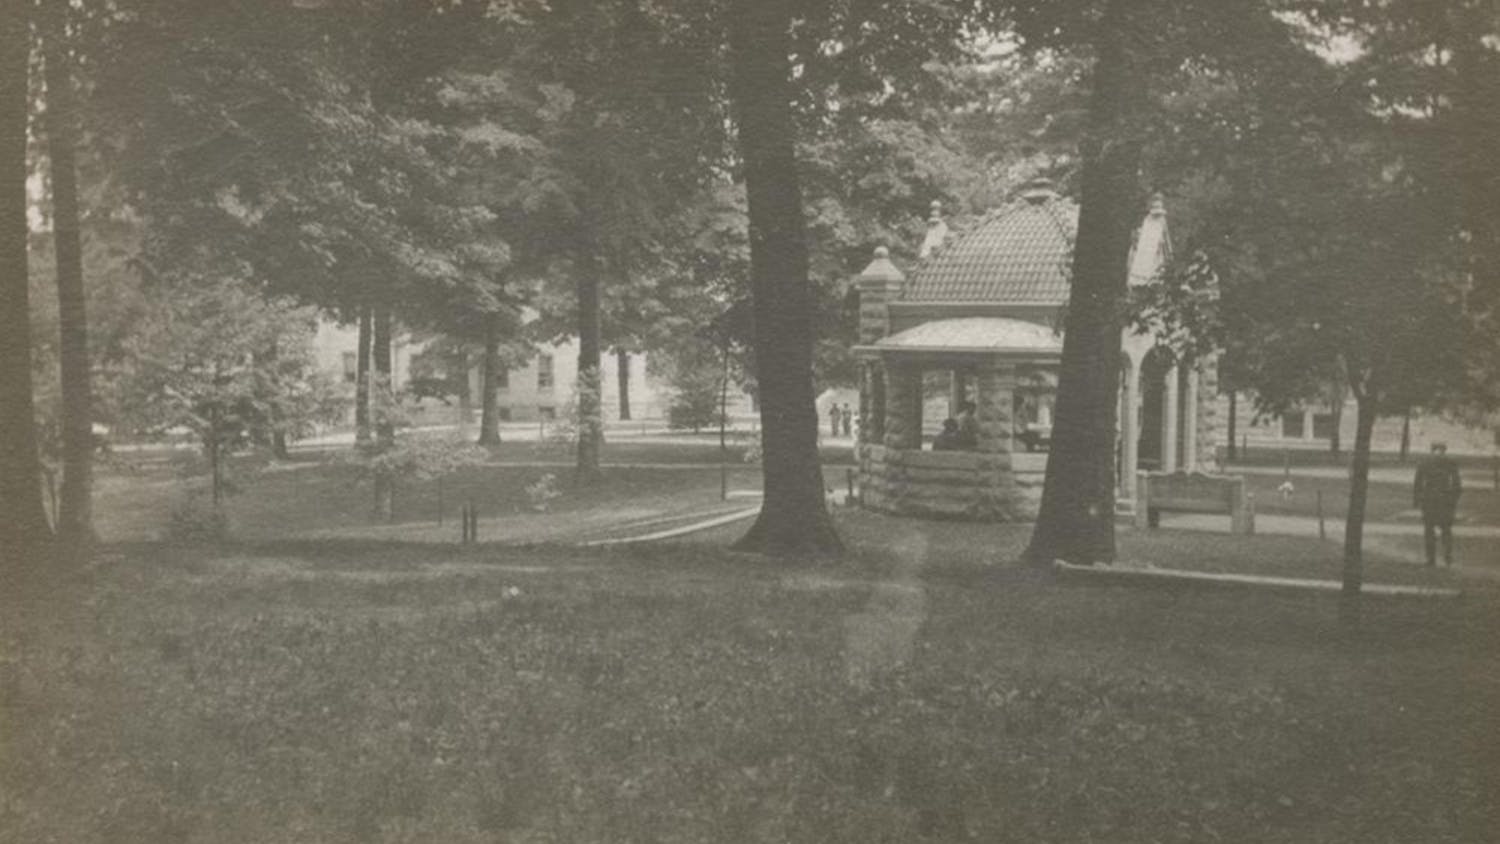 The Rose Well House during the year 1910, just two years after its presentation by Theodore F. Rose in 1908. The shape of the structure was based upon the Beta Theta Pi fraternity's pin because&nbsp;Rose was a brother during his time at IU.&nbsp;